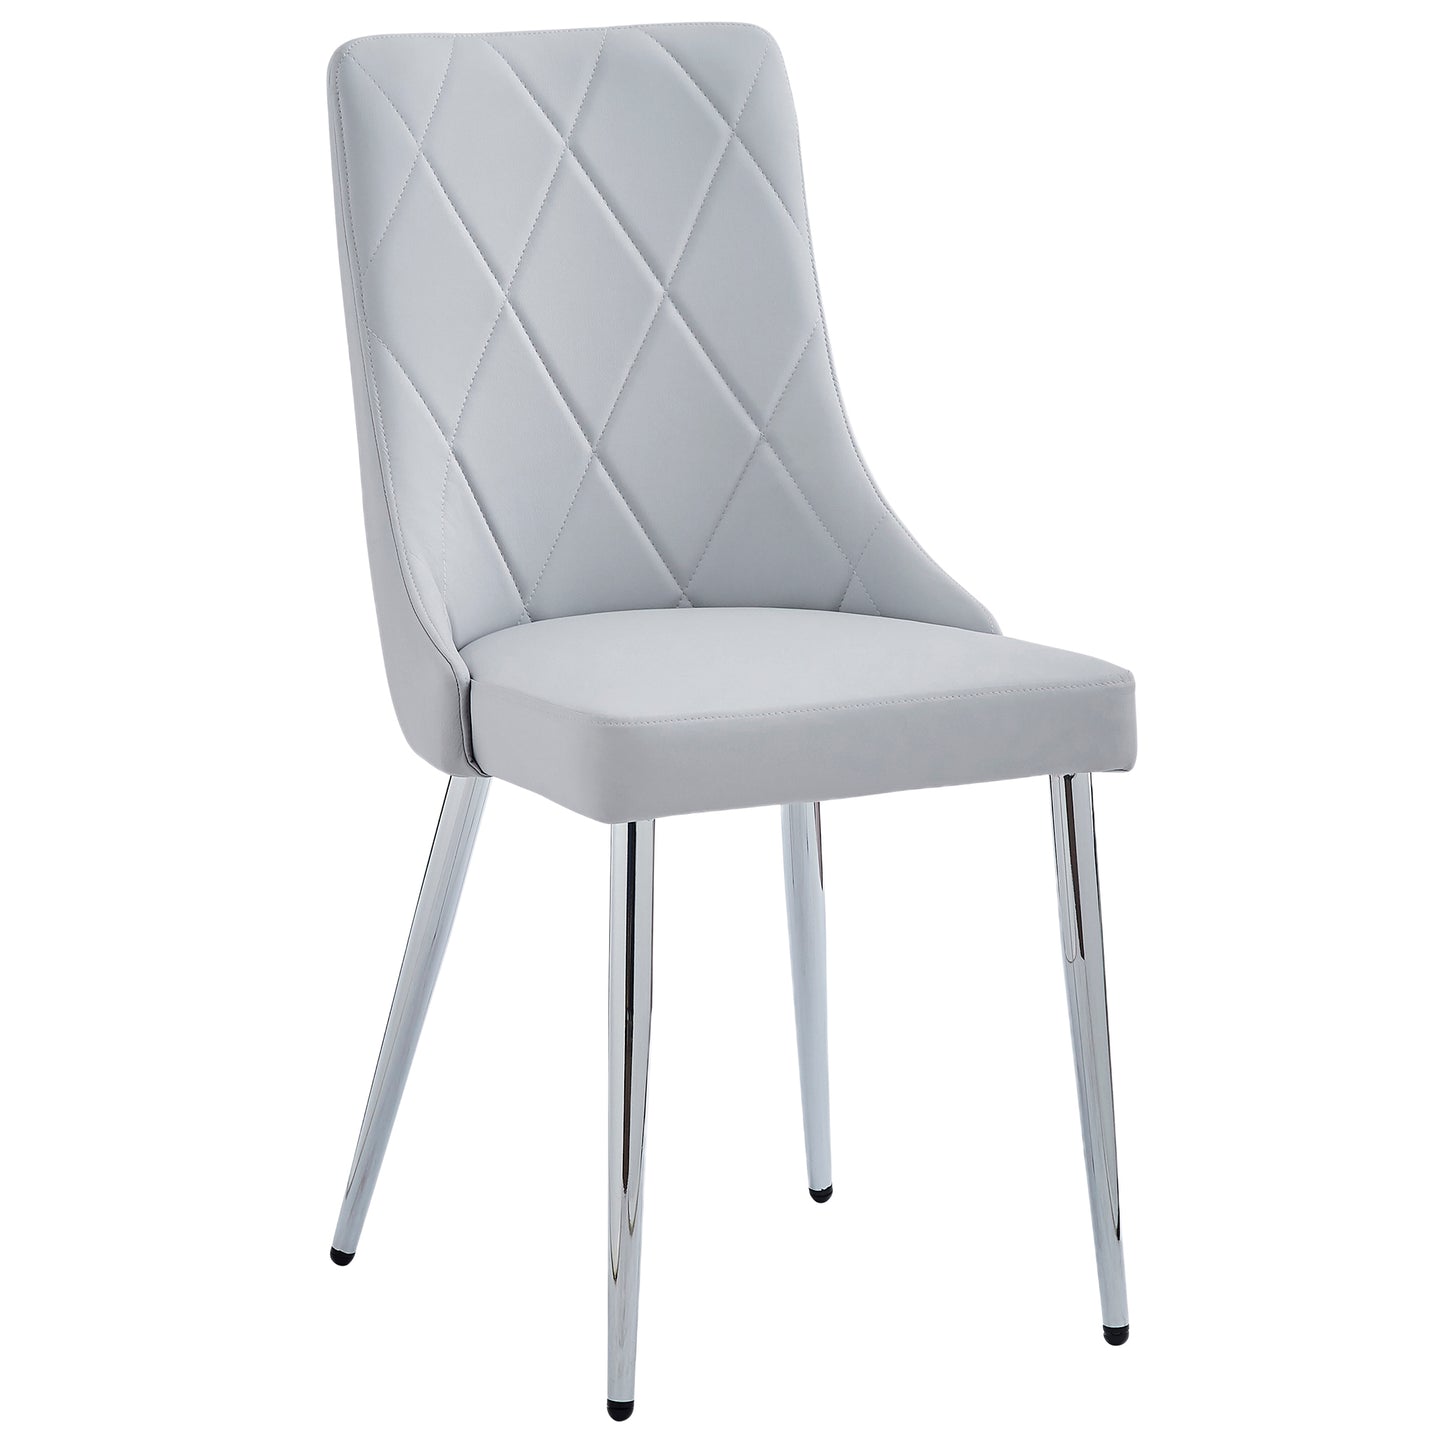 Napoli/Devo Dining Set in Grey with Light Grey Chair (Table + 6 Chairs)